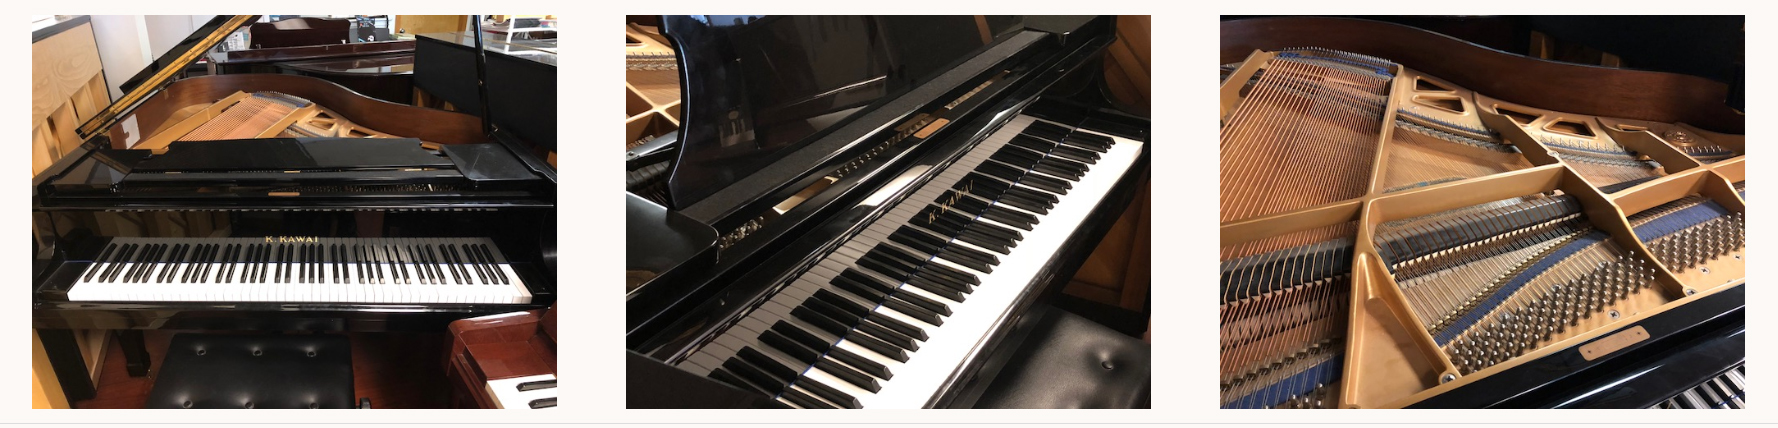 triple view picture of a Kawai Grand Piano, third 
					picture shows interior with frame and strings showing prominently.